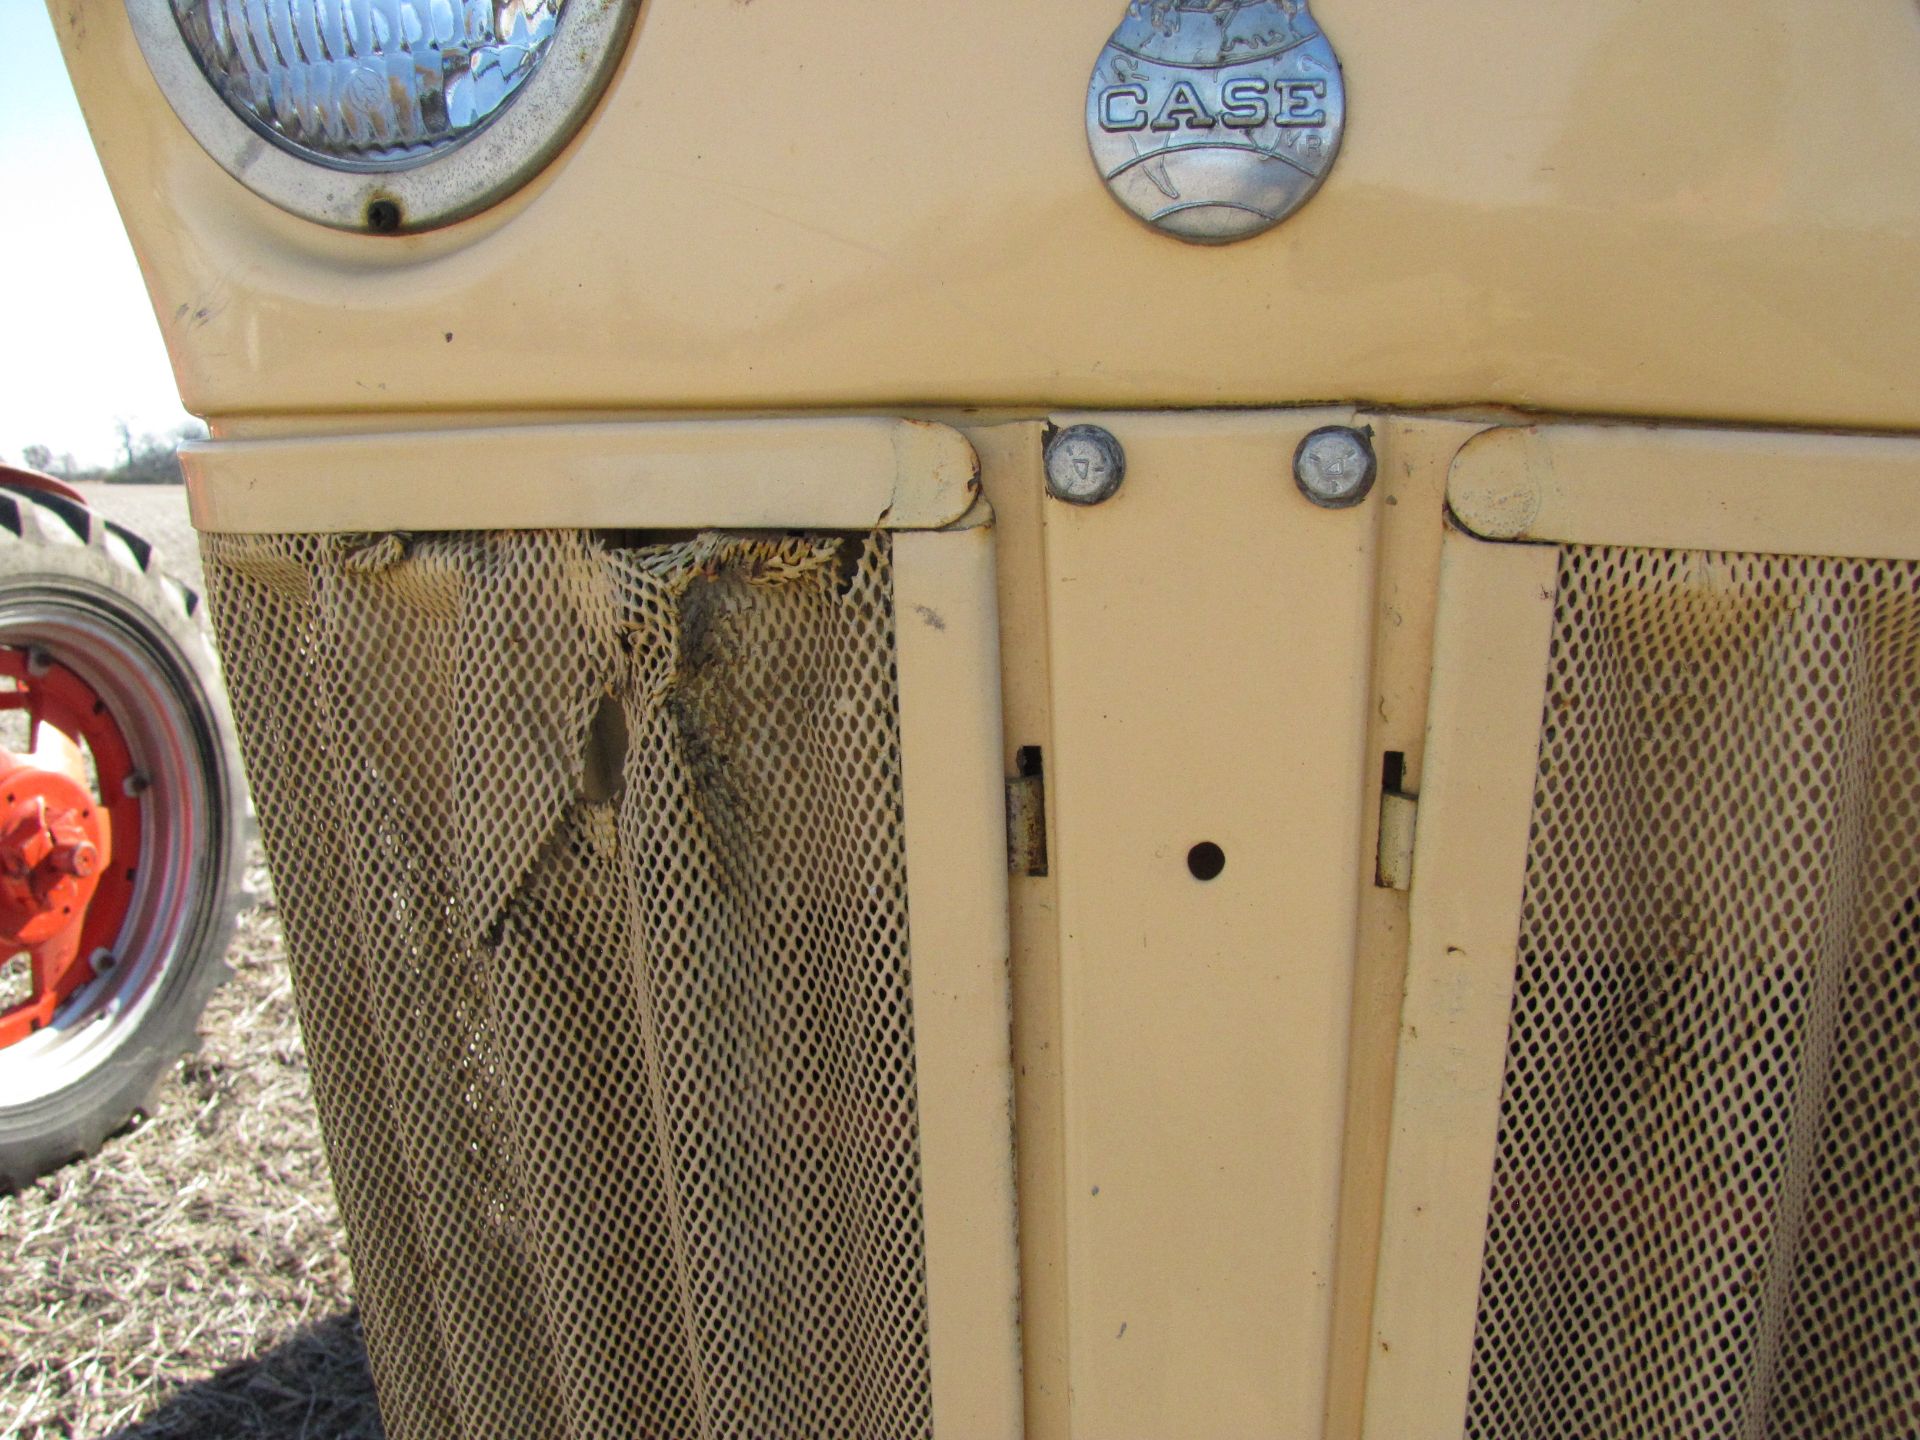 Case 730 Tractor - Image 12 of 51